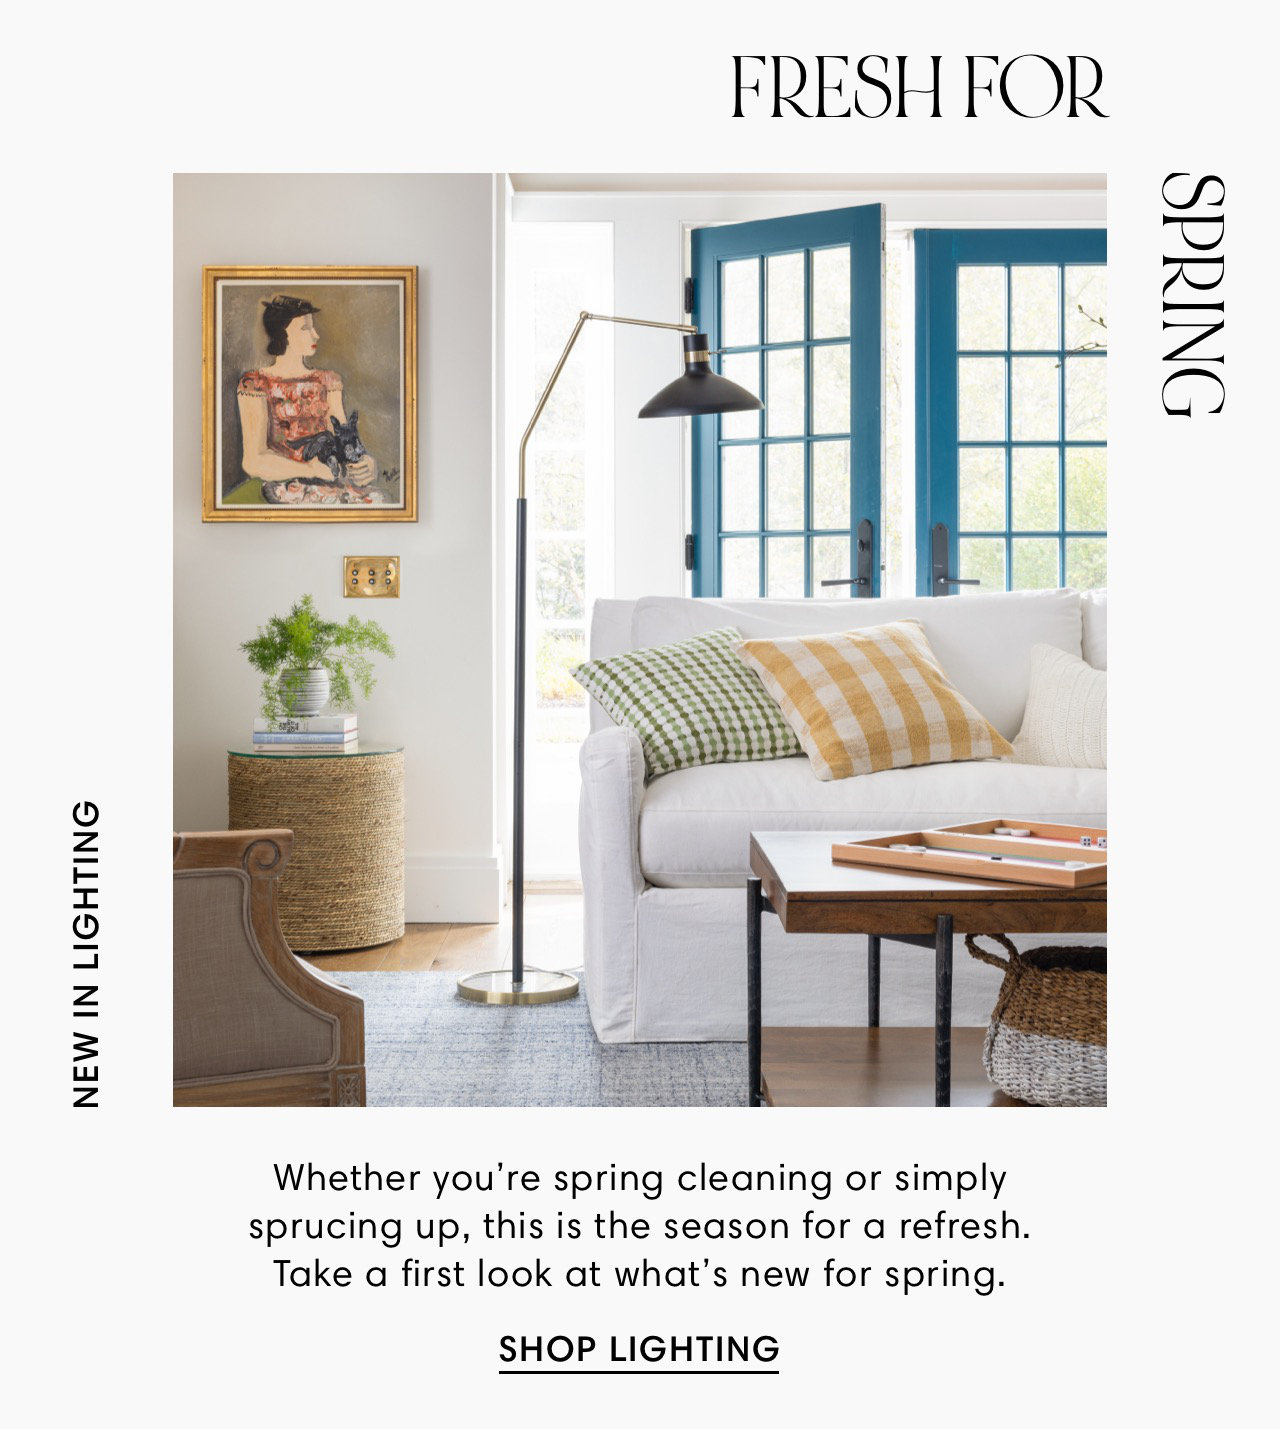 NEW IN LIGHTING FRESH FOR Whether you're spring cleaning or simply sprucing up, this is the season for a refresh. Take a first look at what's new for spring. SHOP LIGHTING ONIAdS 